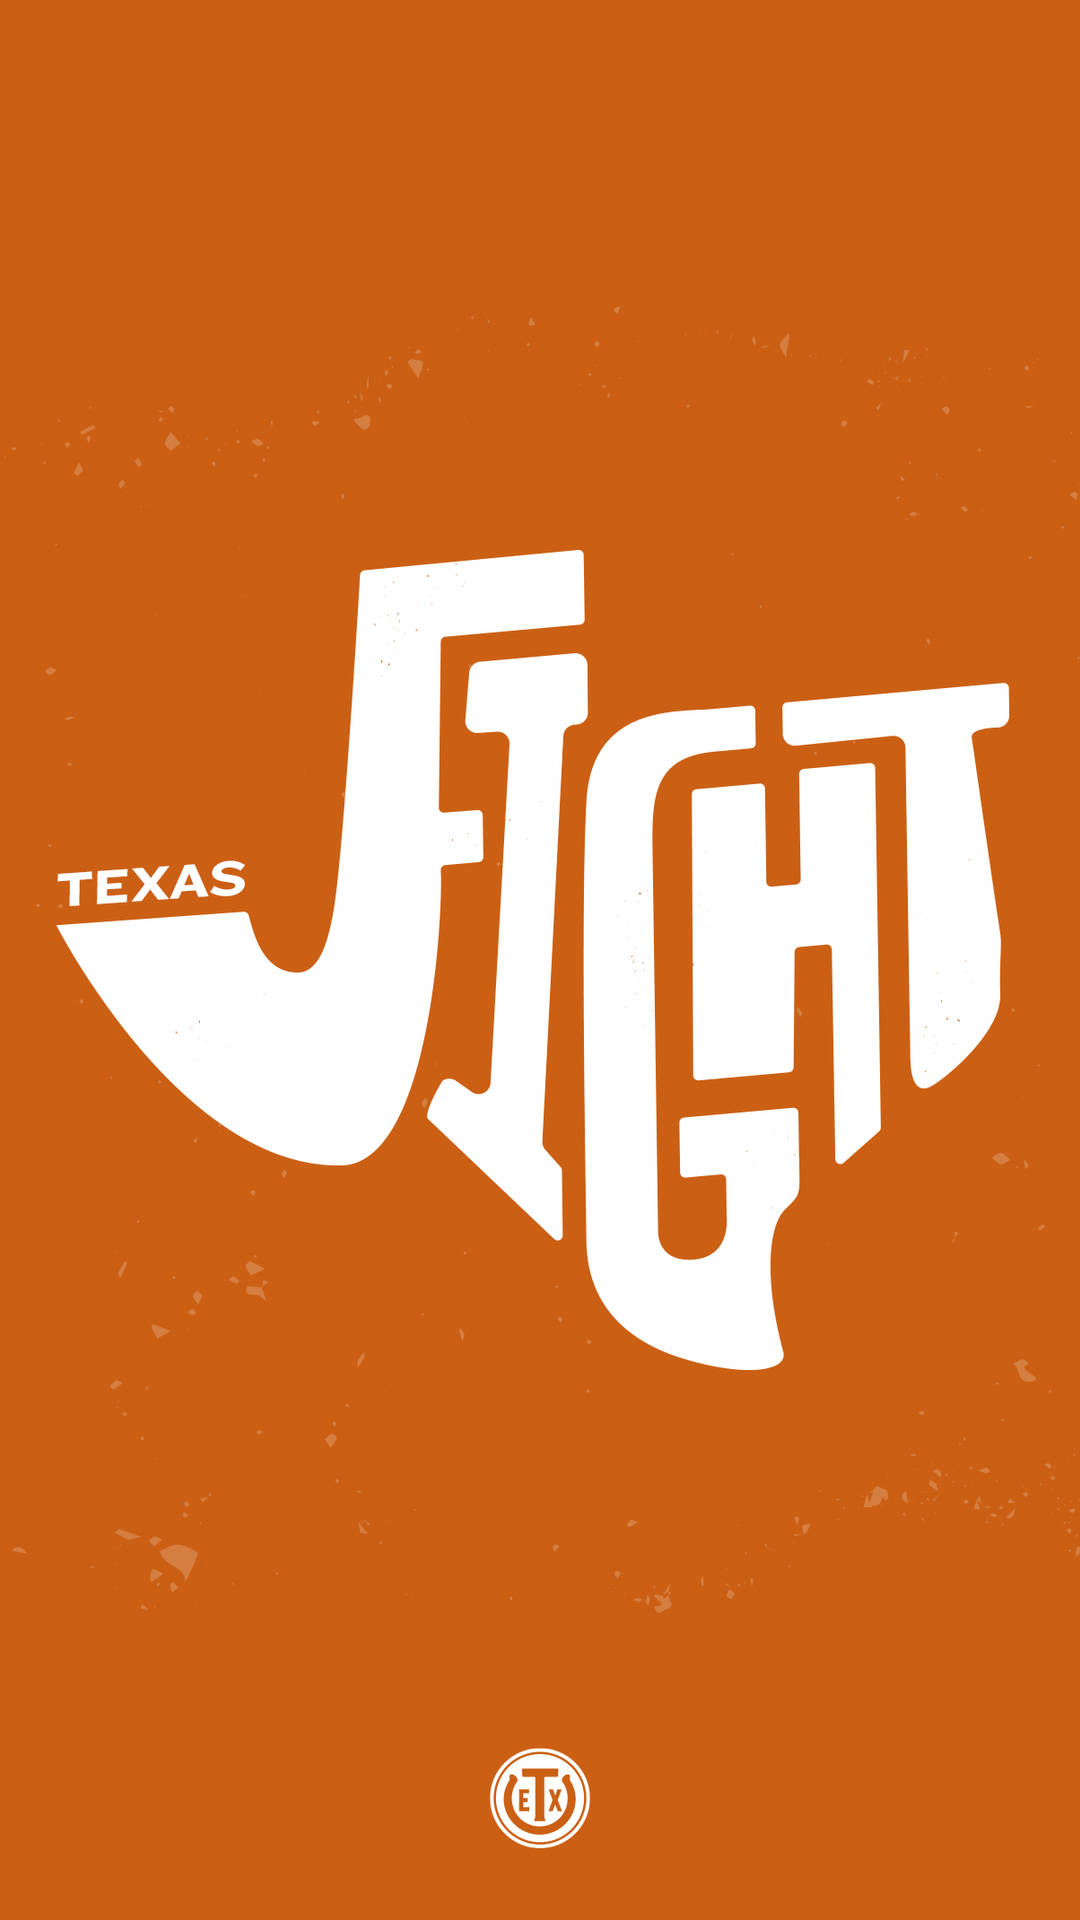 Texaslonghorn Fight Can Be Translated To 